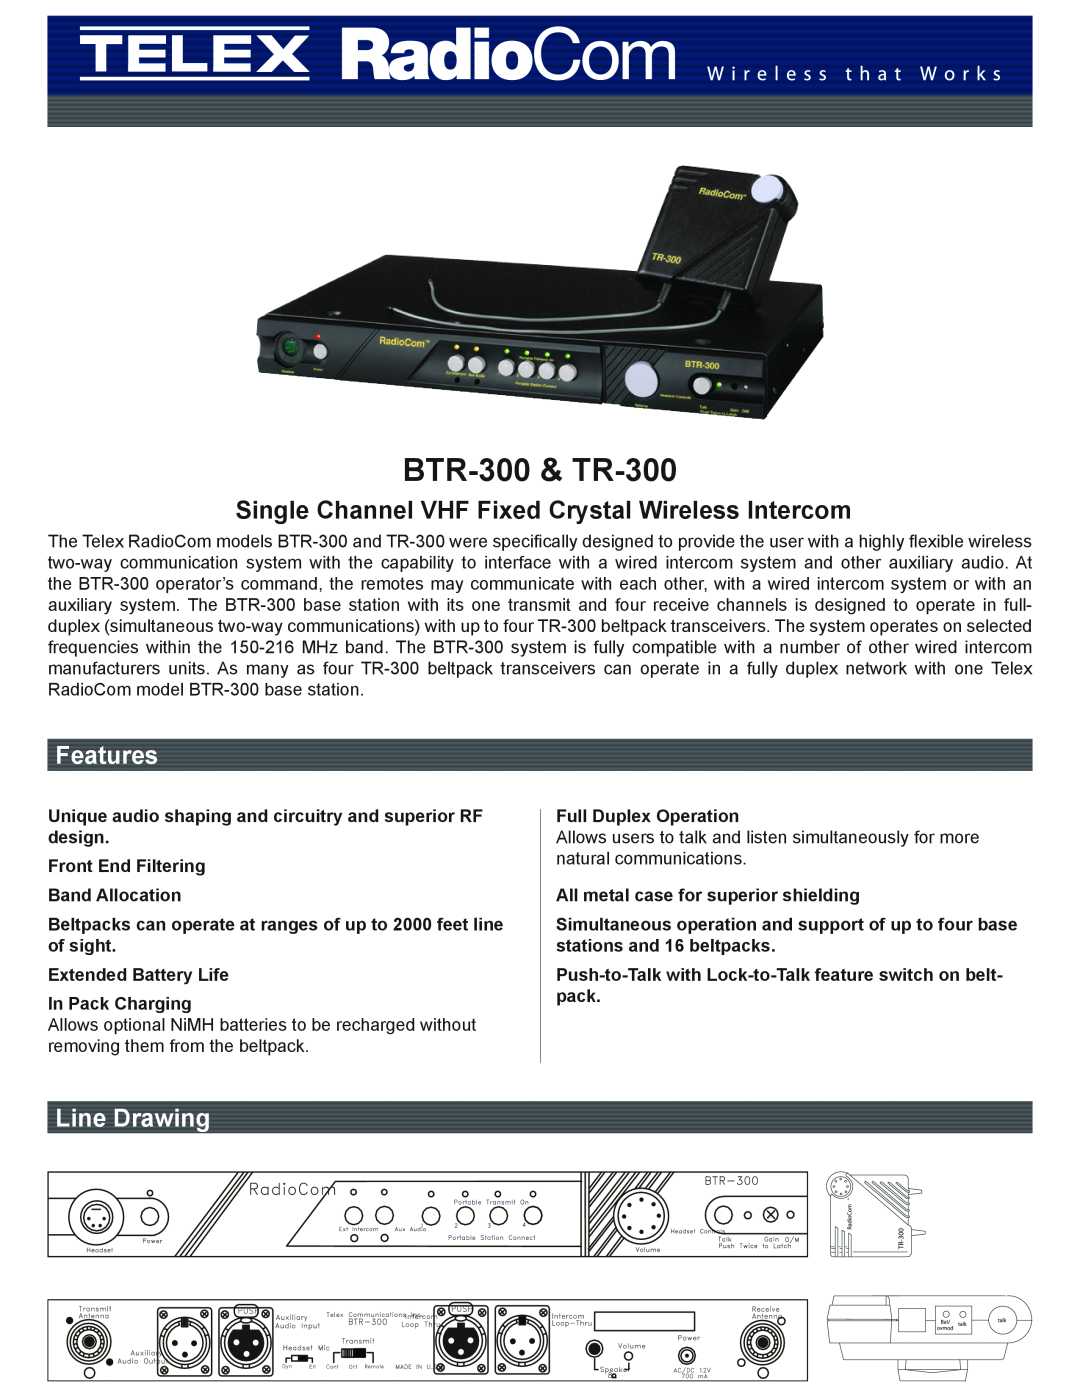 Telex manual BTR-300 & TR-300, Single Channel VHF Fixed Crystal Wireless Intercom, Features, Line Drawing 